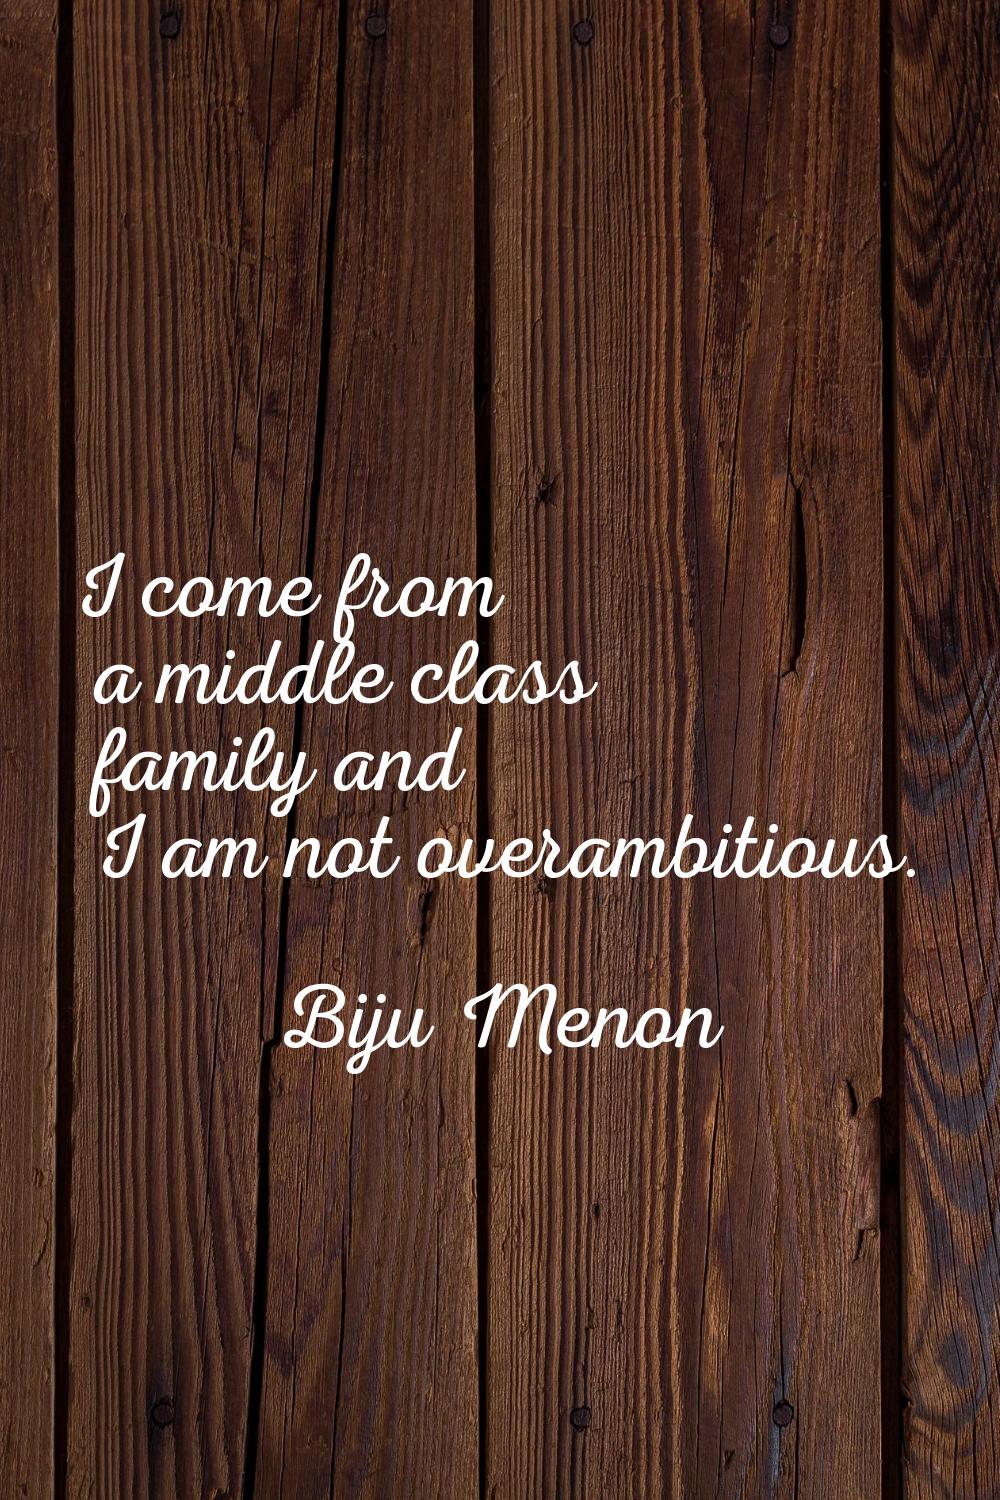 I come from a middle class family and I am not overambitious.